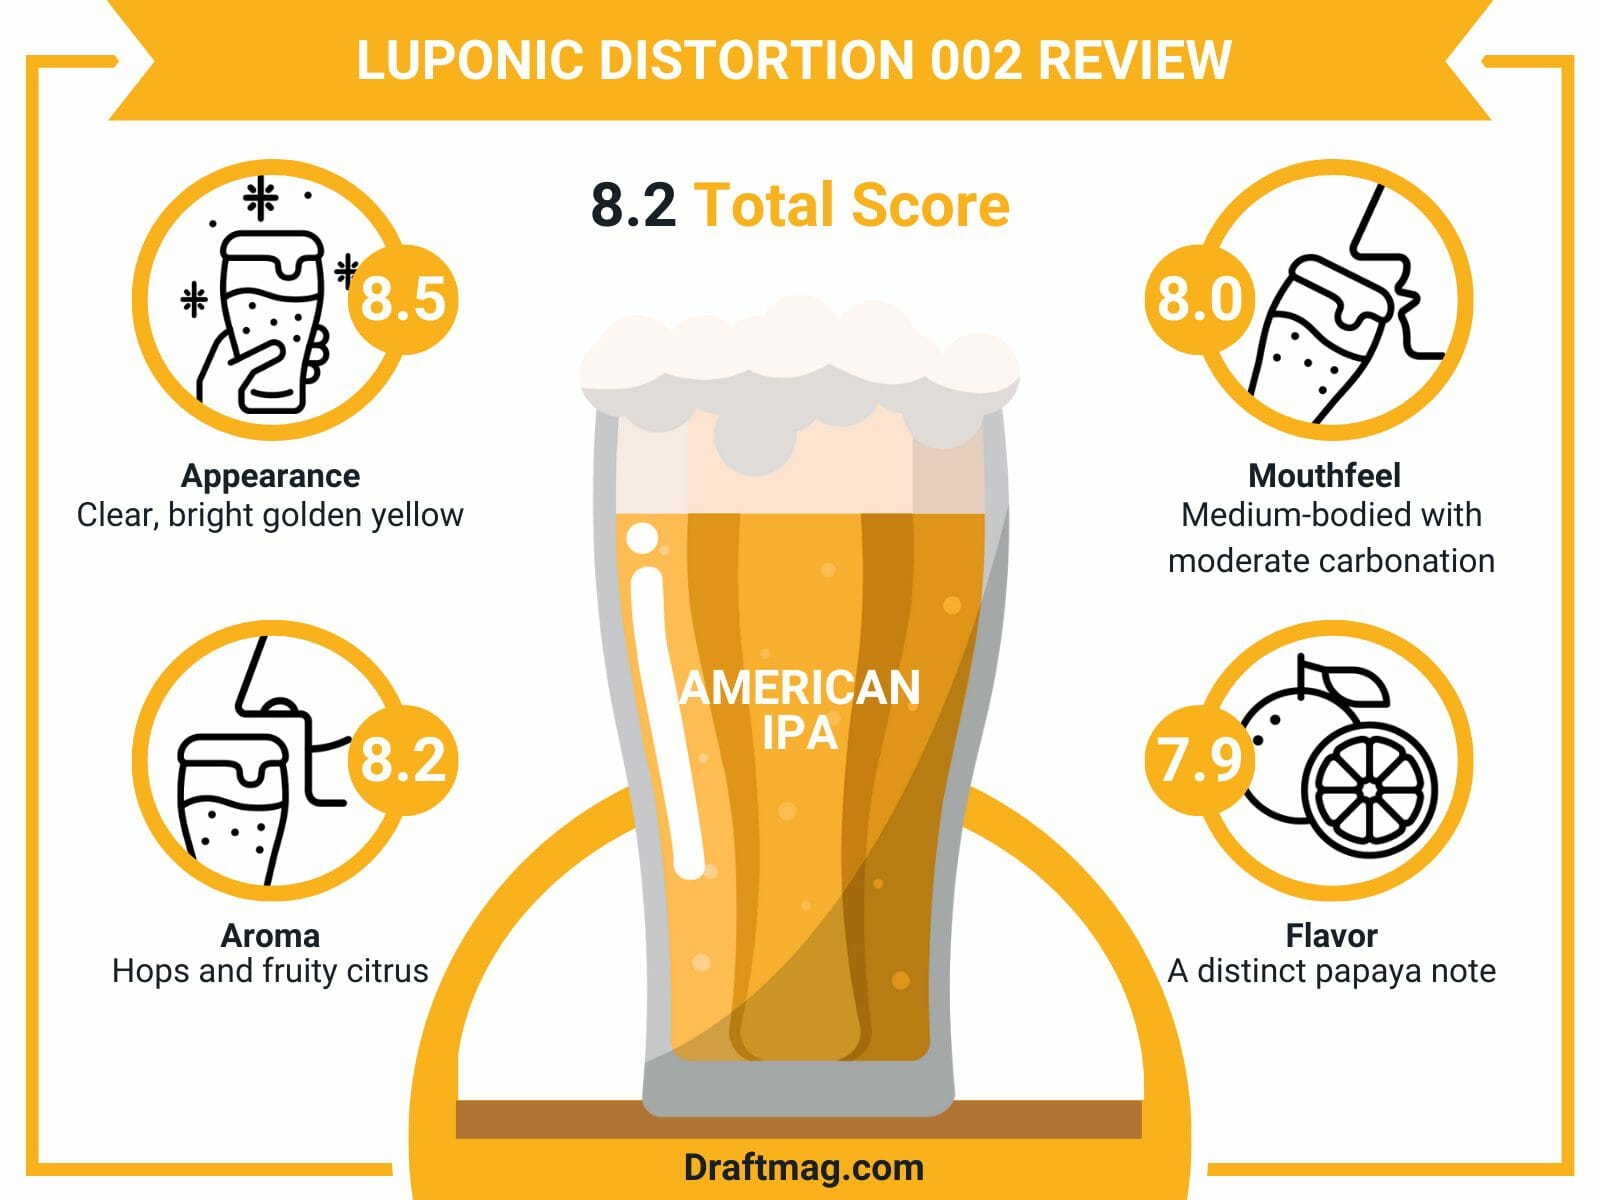 Luponic distortion review infographic